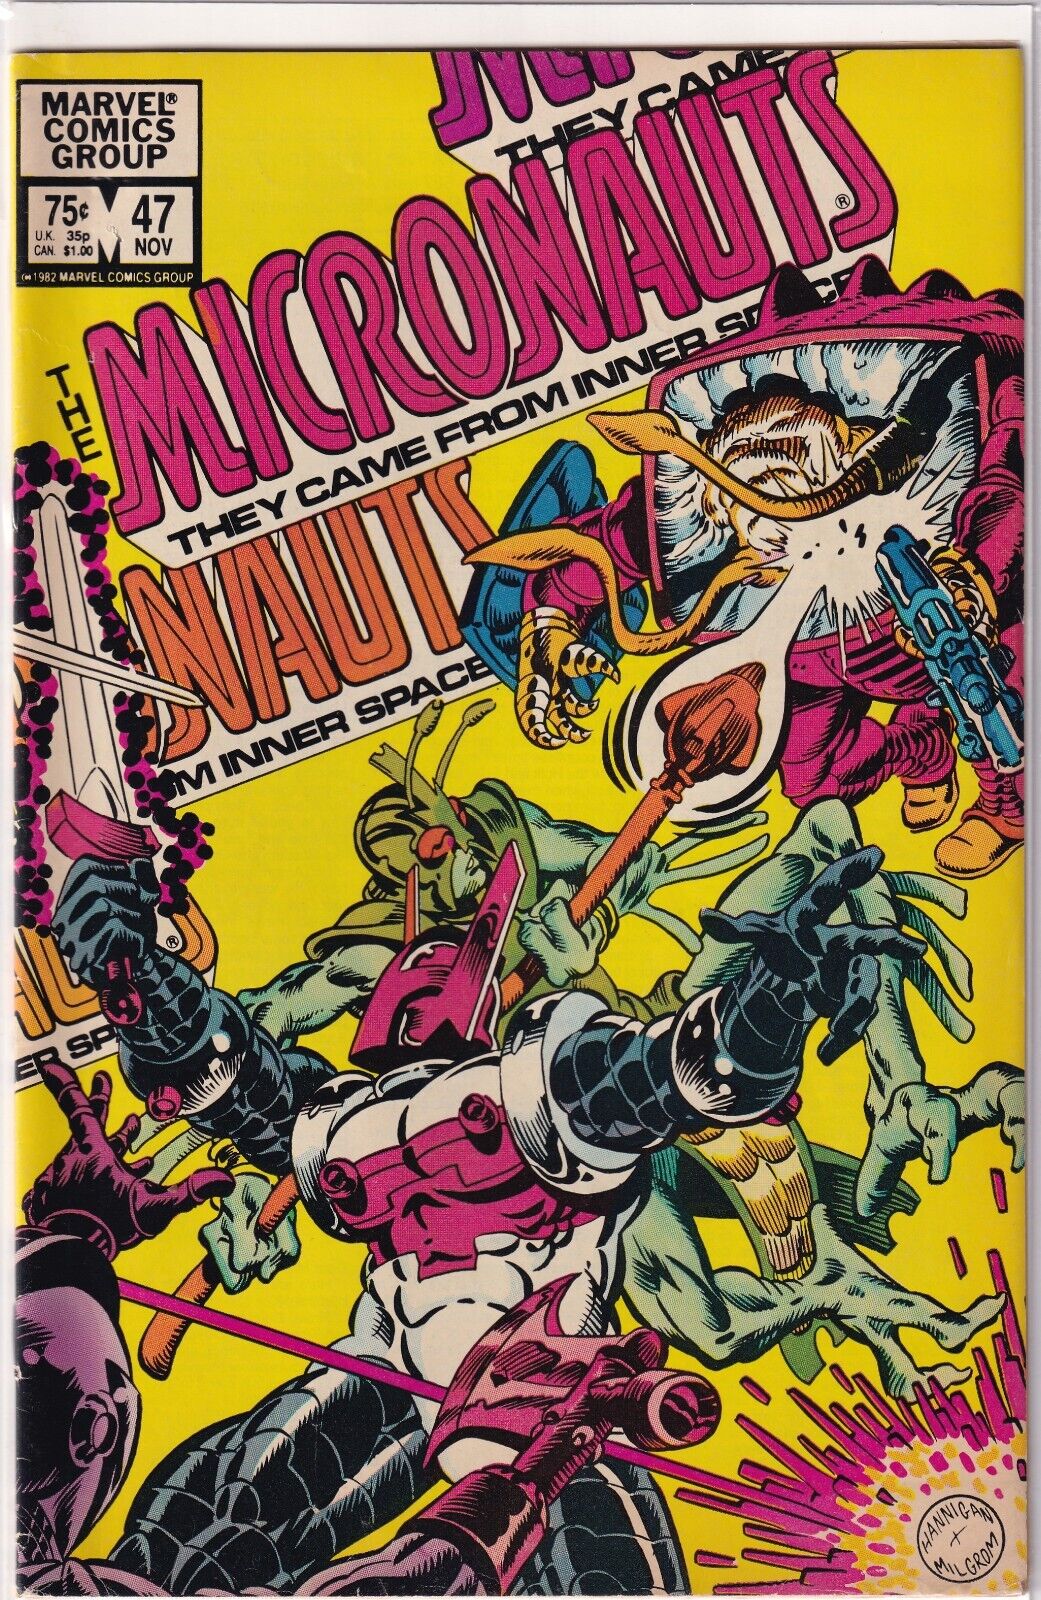 The Micronauts #47 (Marvel Comics, 1982) The Came from Inner Space